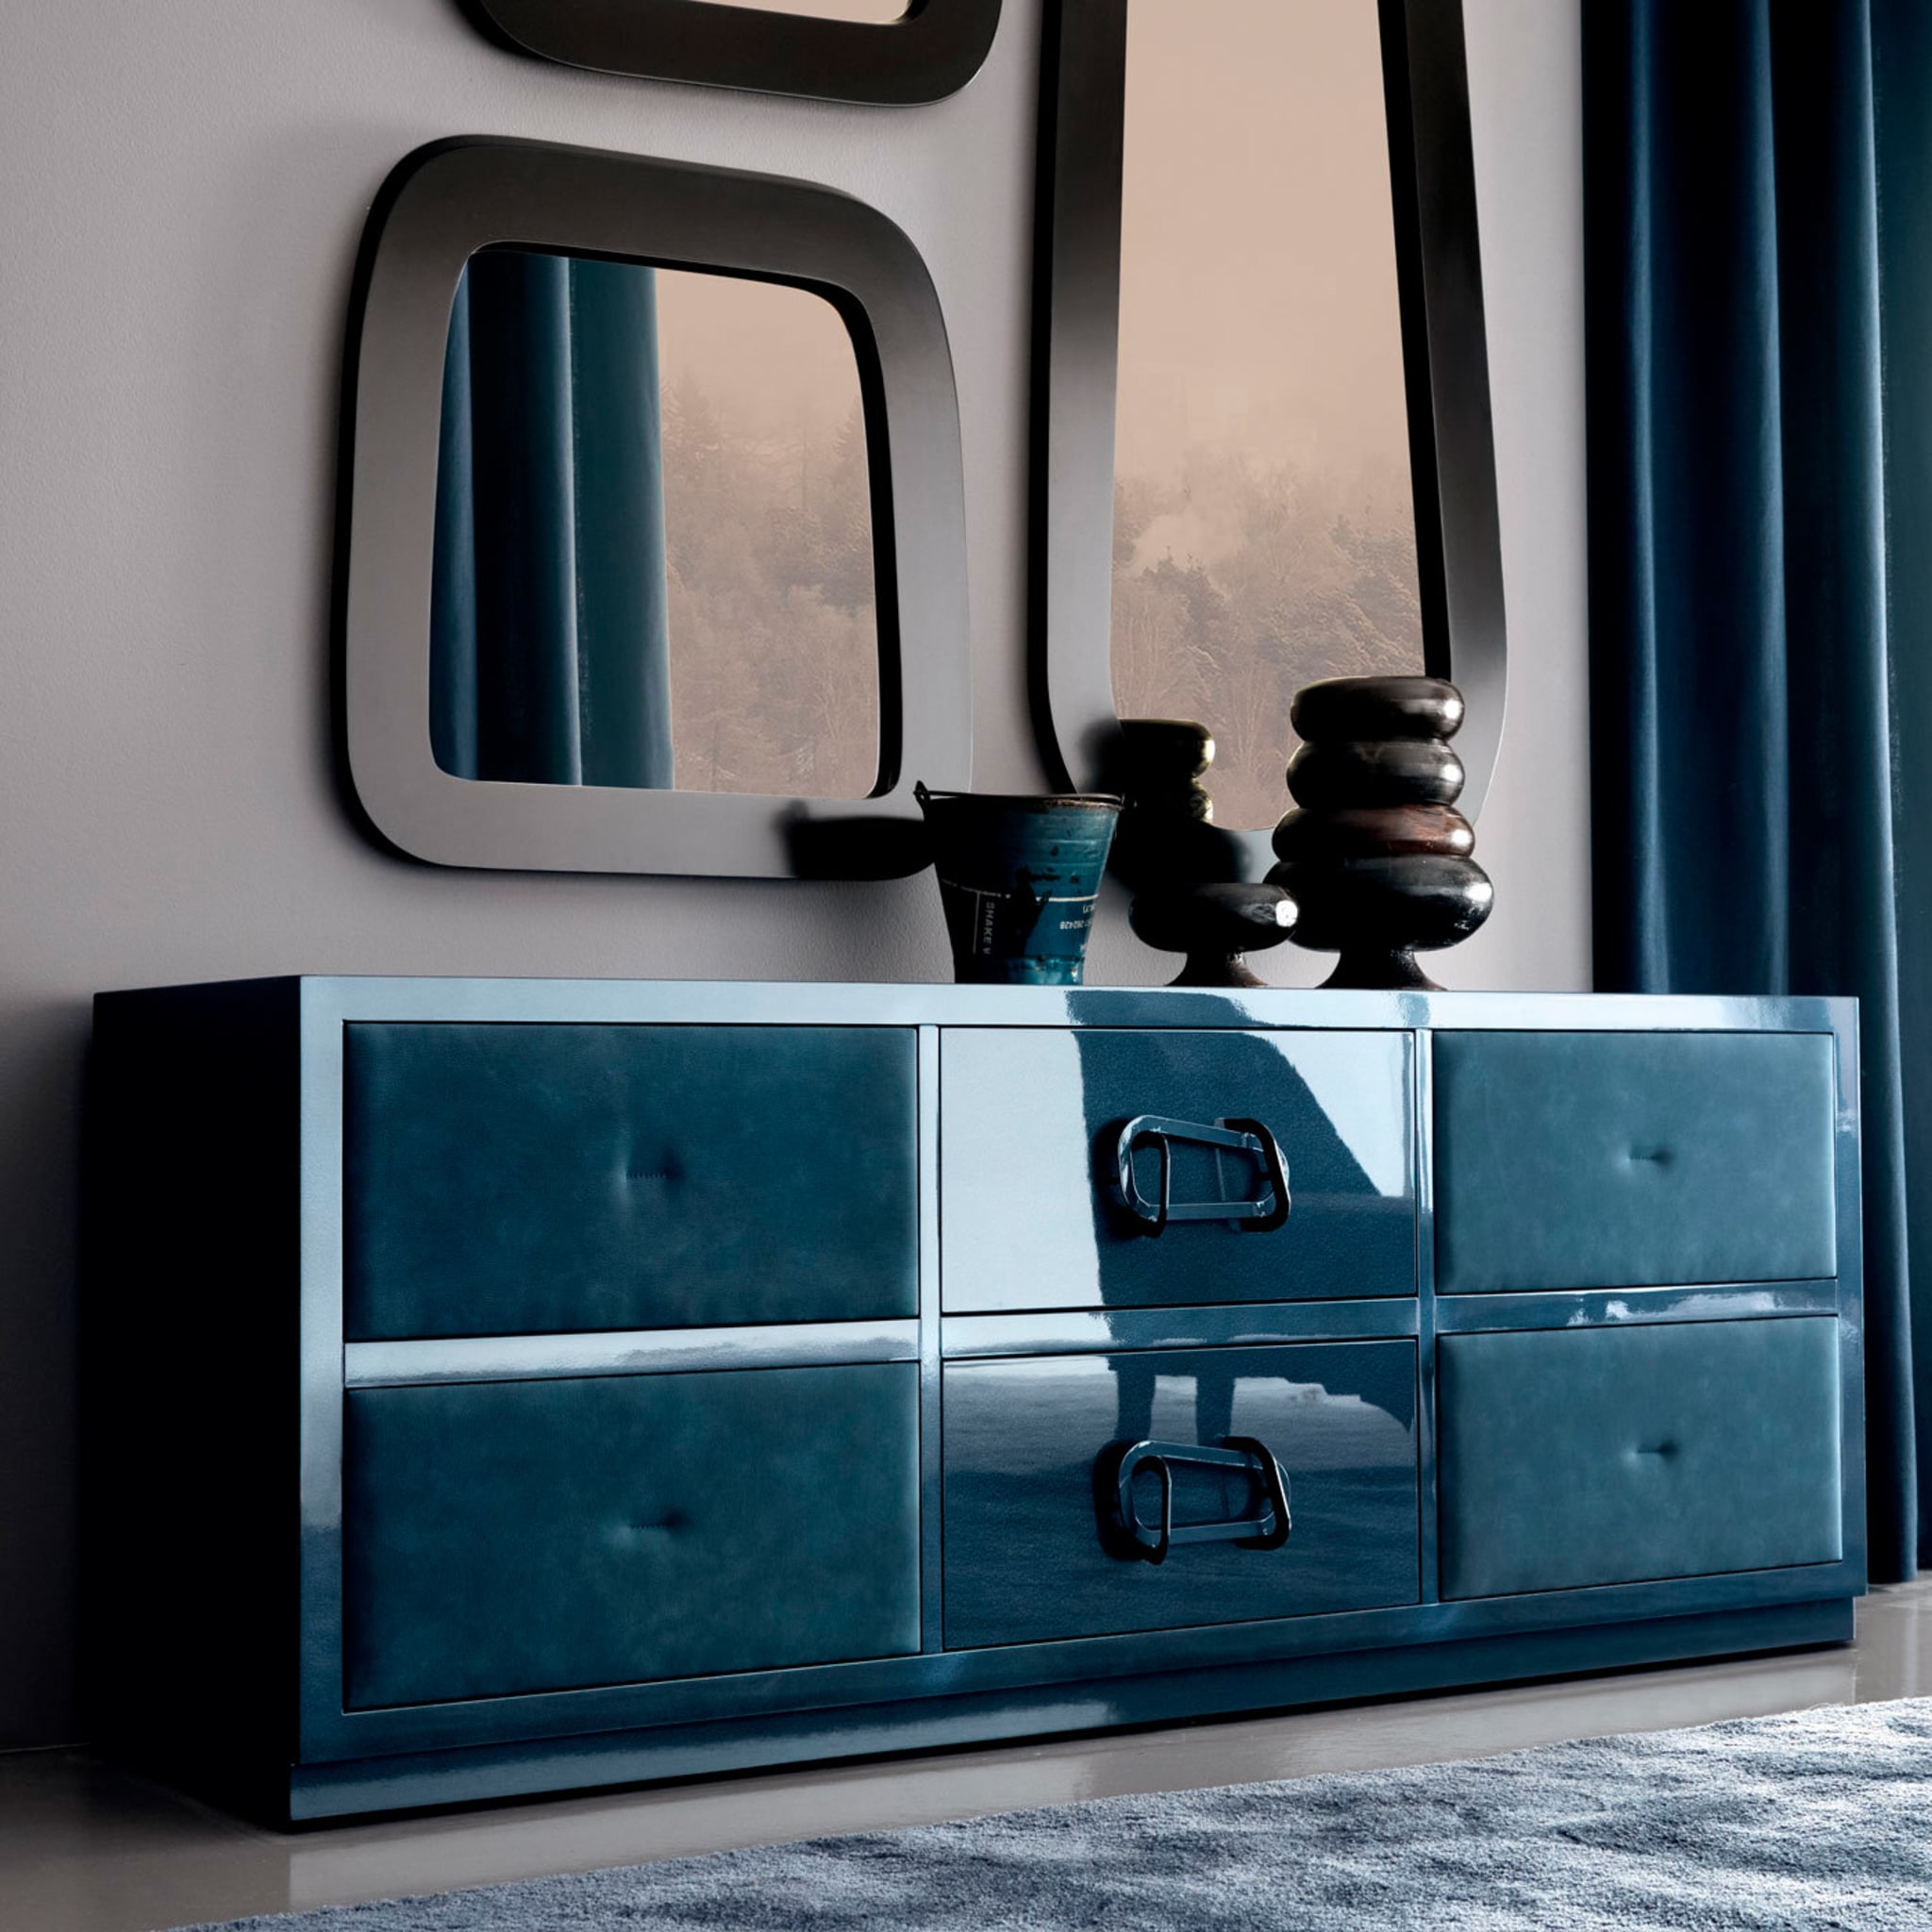 Keope Soft Blue Chest of Drawers by Archirivolto - Alternative view 2